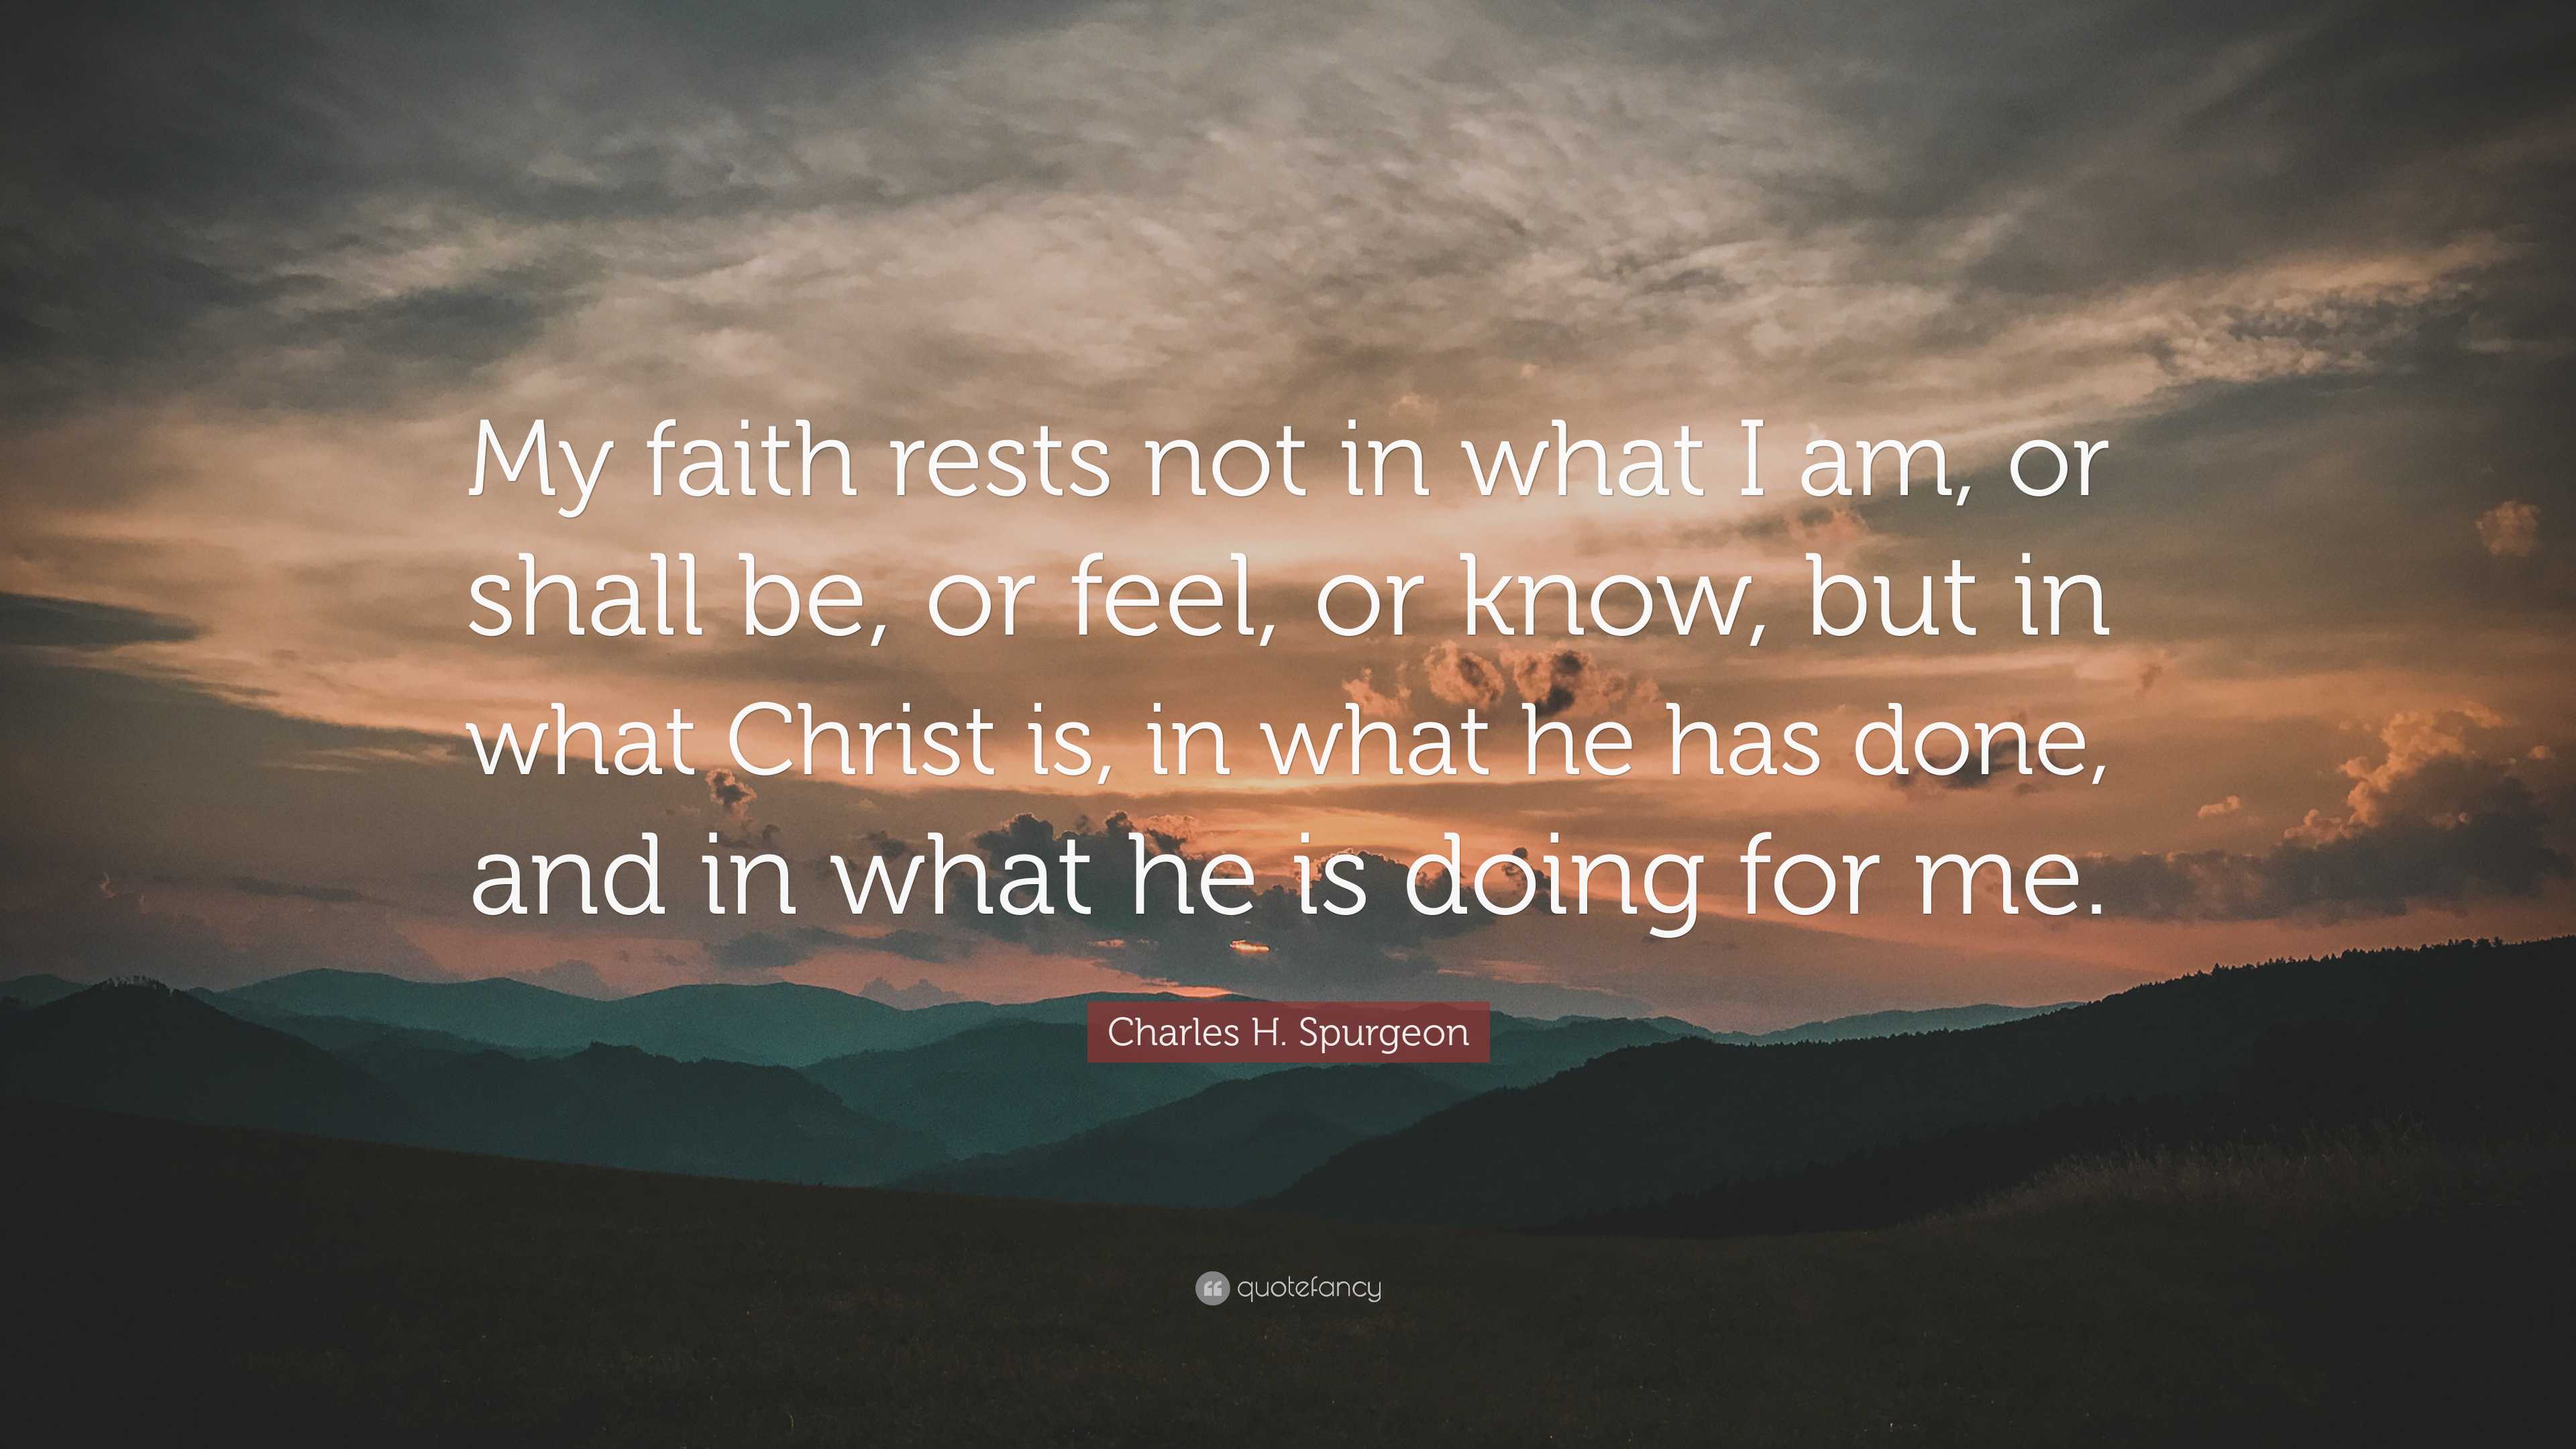 Charles H. Spurgeon Quote: “My faith rests not in what I am, or shall ...